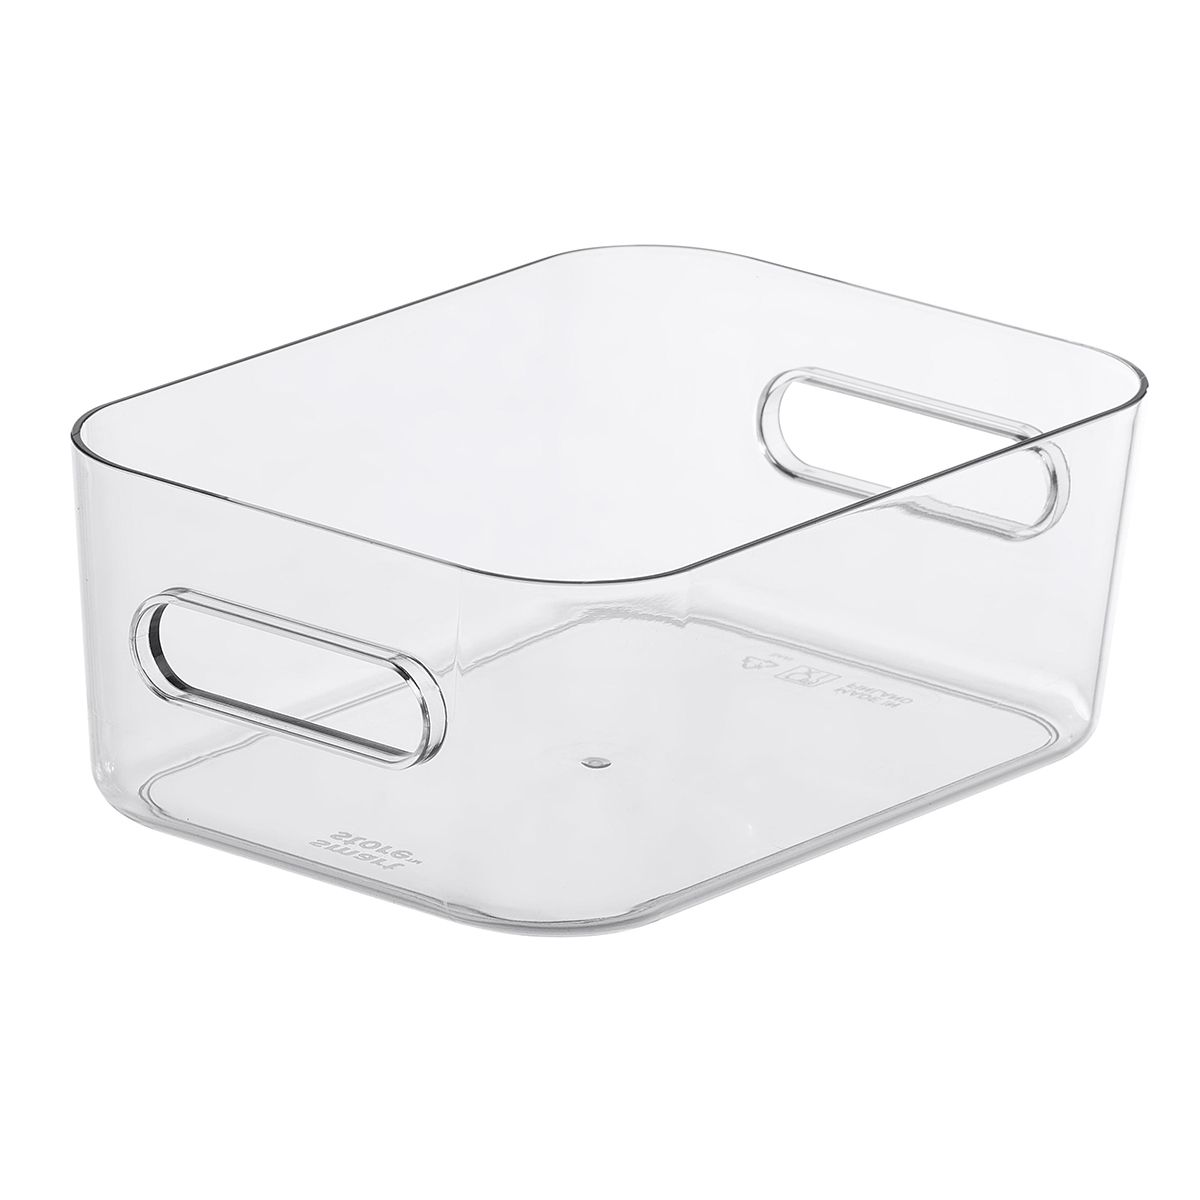 Compact Plastic Bin w/ Handles | The Container Store